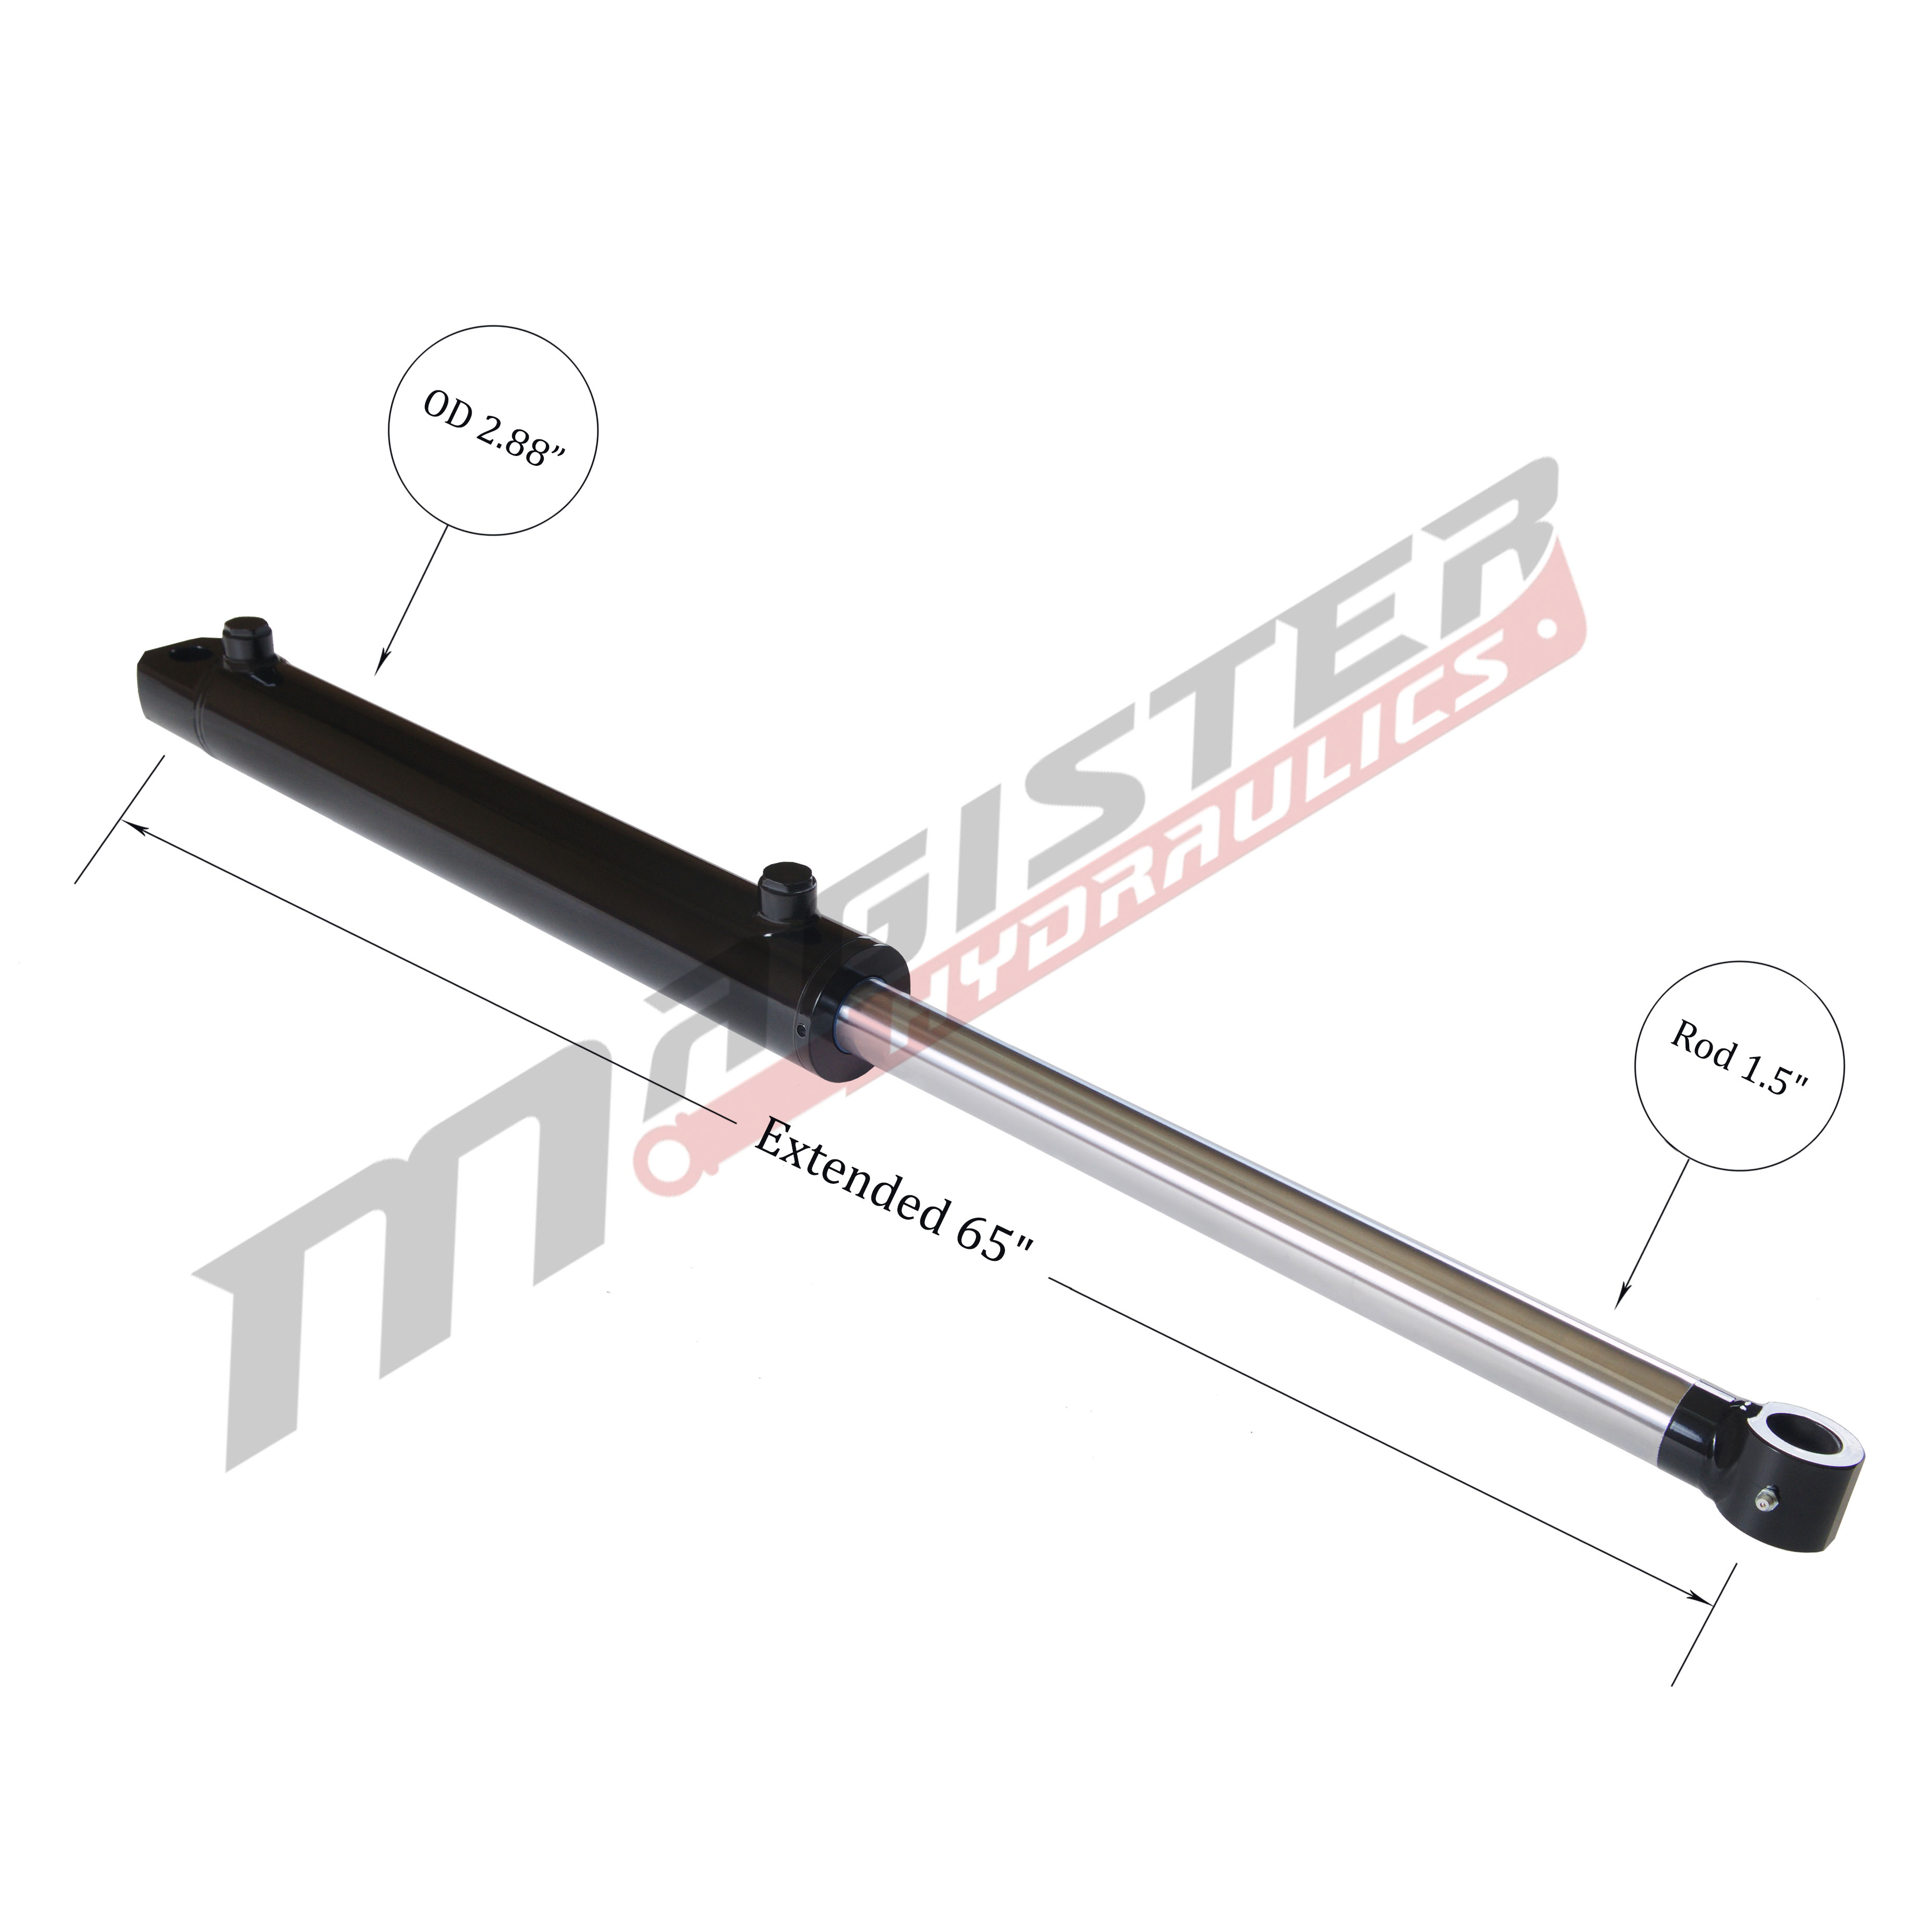 2.5 bore x 28 stroke hydraulic cylinder, welded tang double acting cylinder | Magister Hydraulics